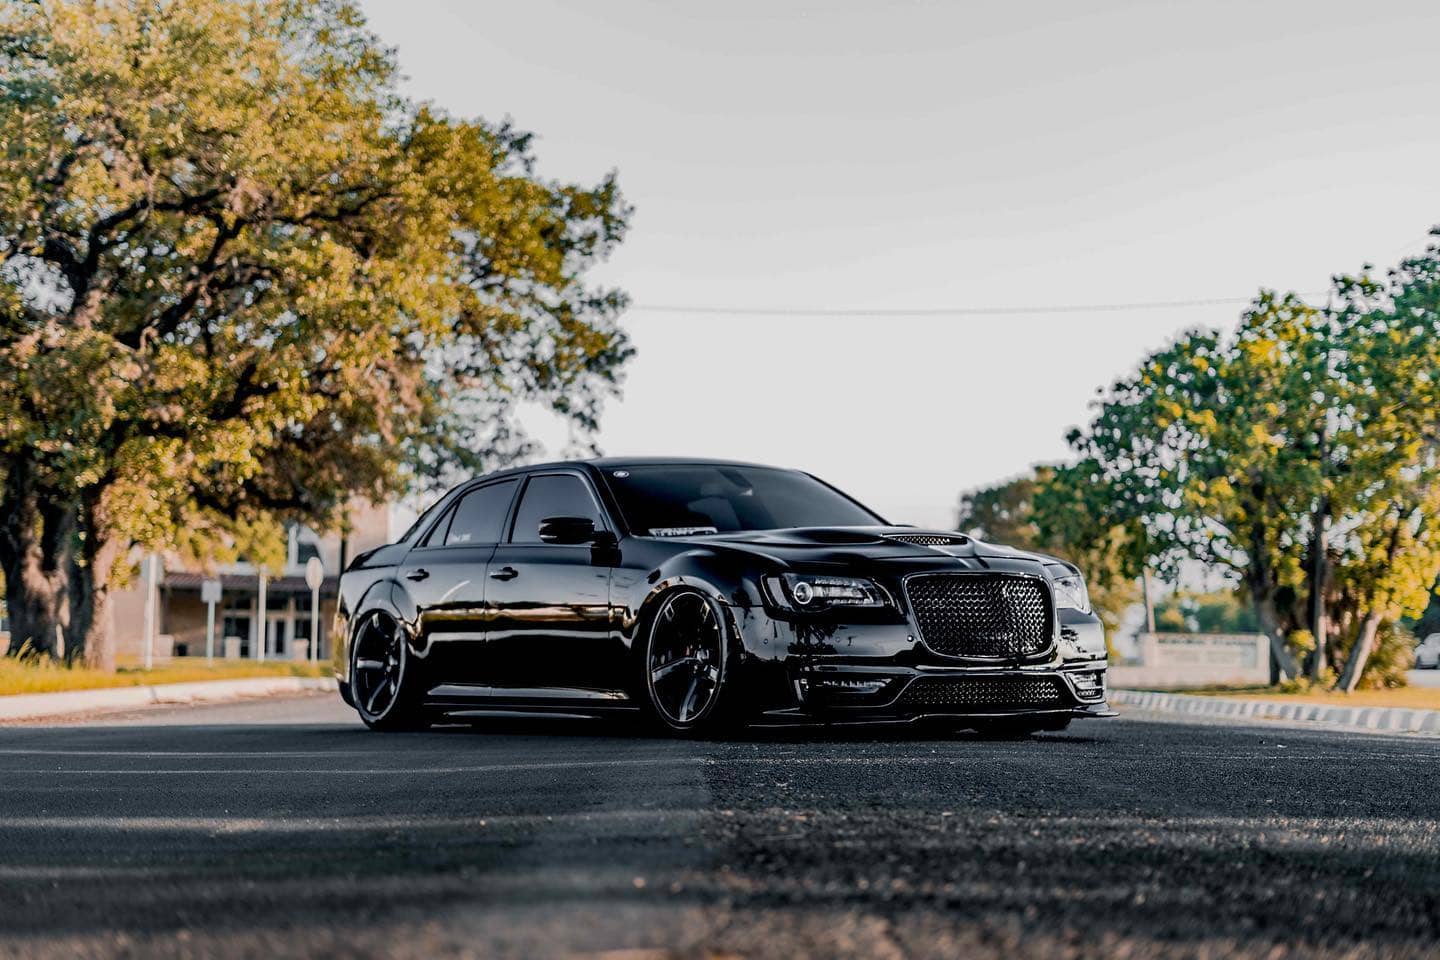 Slammed Chrysler 300 with air suspension and blacked out exterior